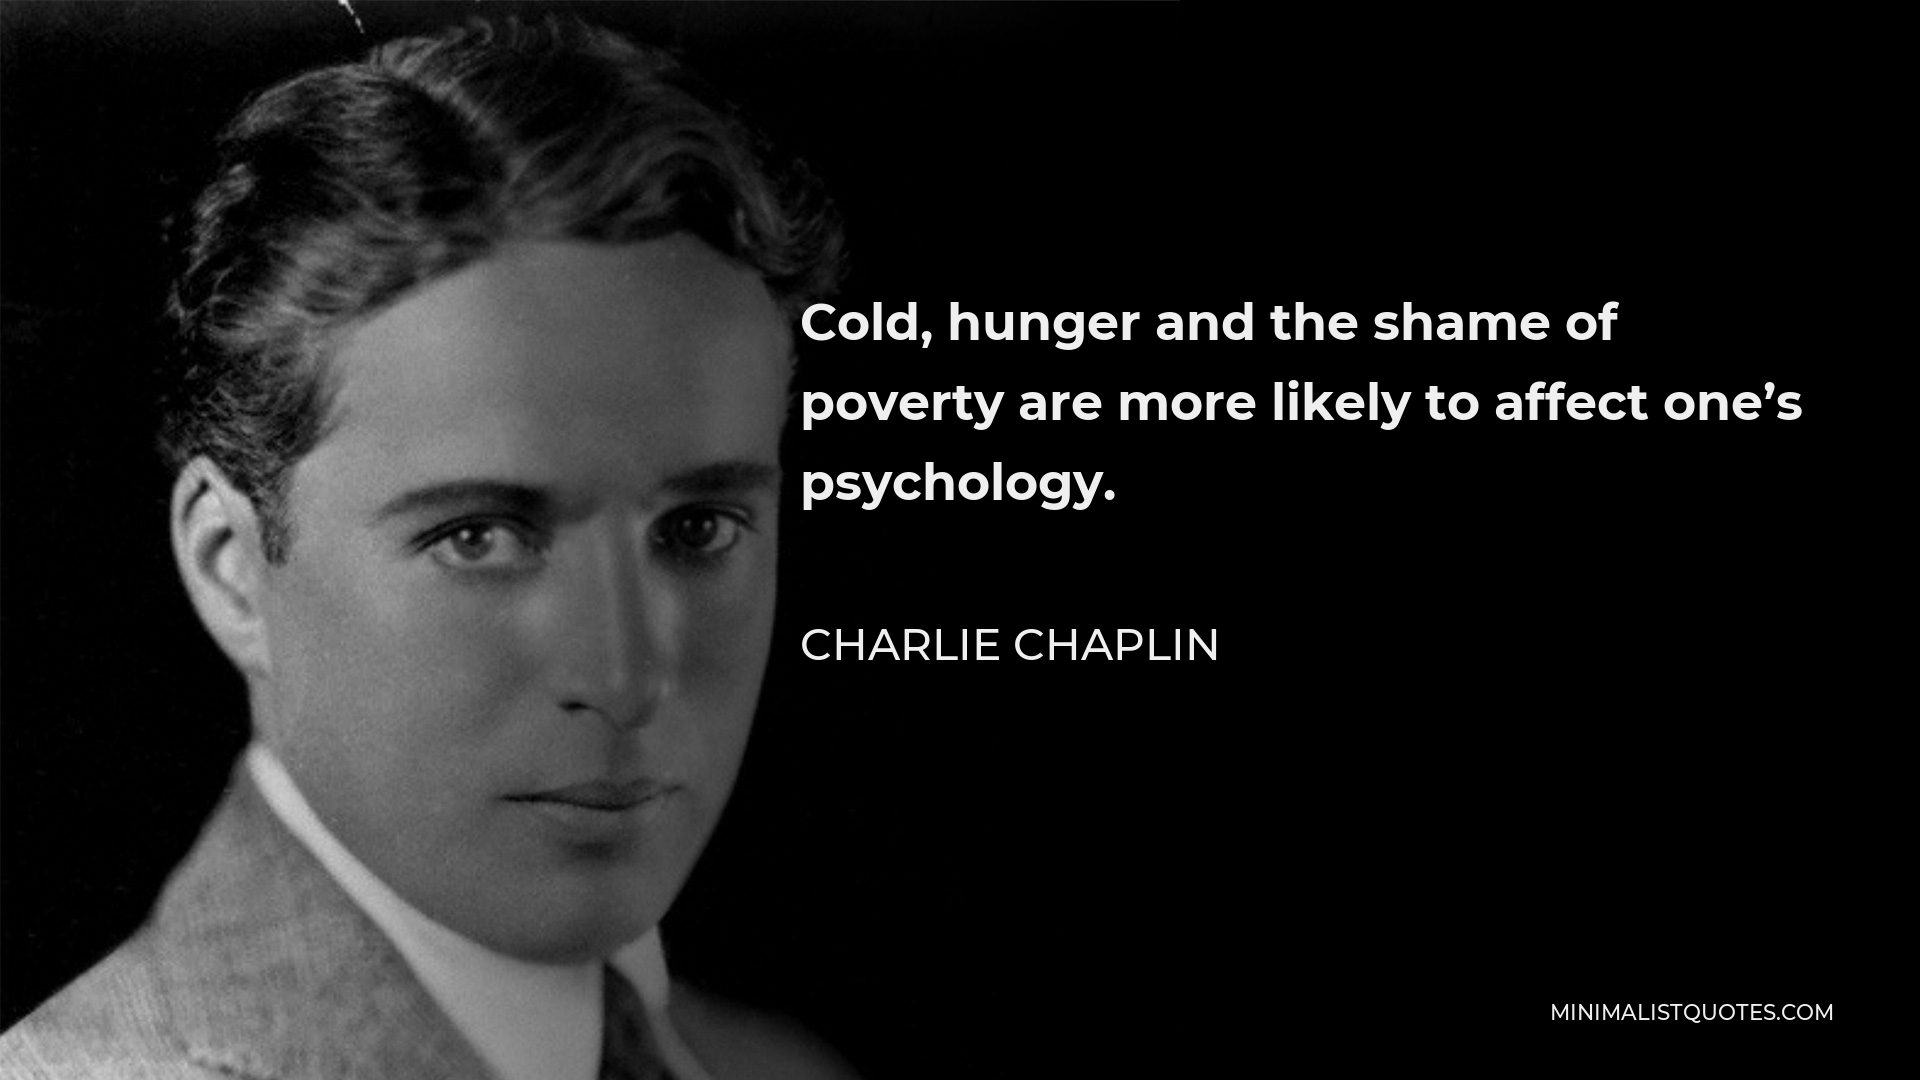 Charlie Chaplin Quote - Cold, hunger and the shame of poverty are more likely to affect one’s psychology.